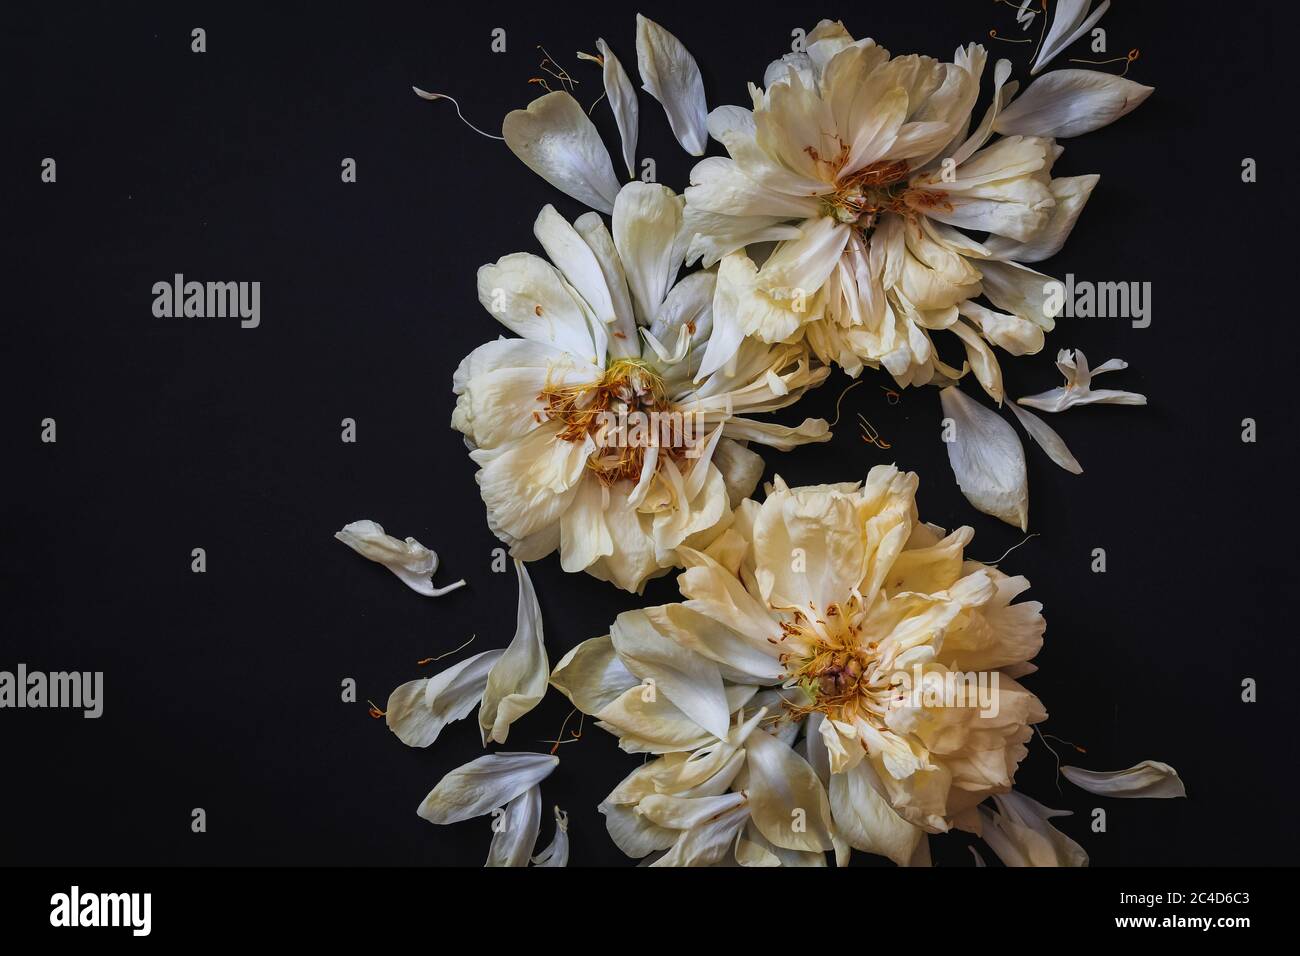 Fading peonies blooms arranged on a black background Stock Photo